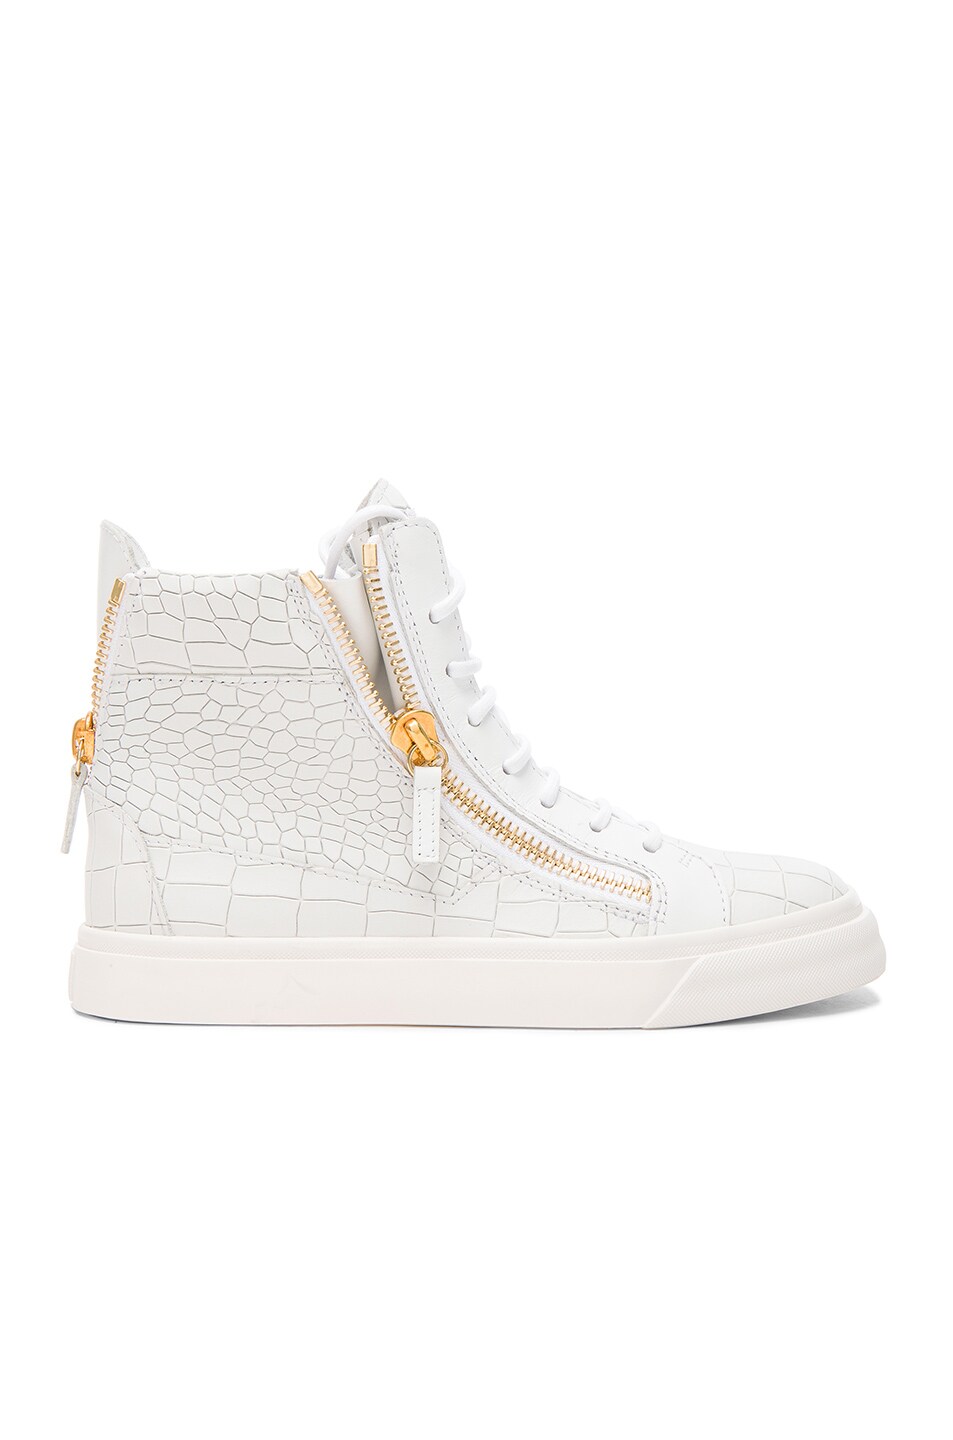 Image 1 of Giuseppe Zanotti Croc Embossed Leather Sneakers in Light Grey